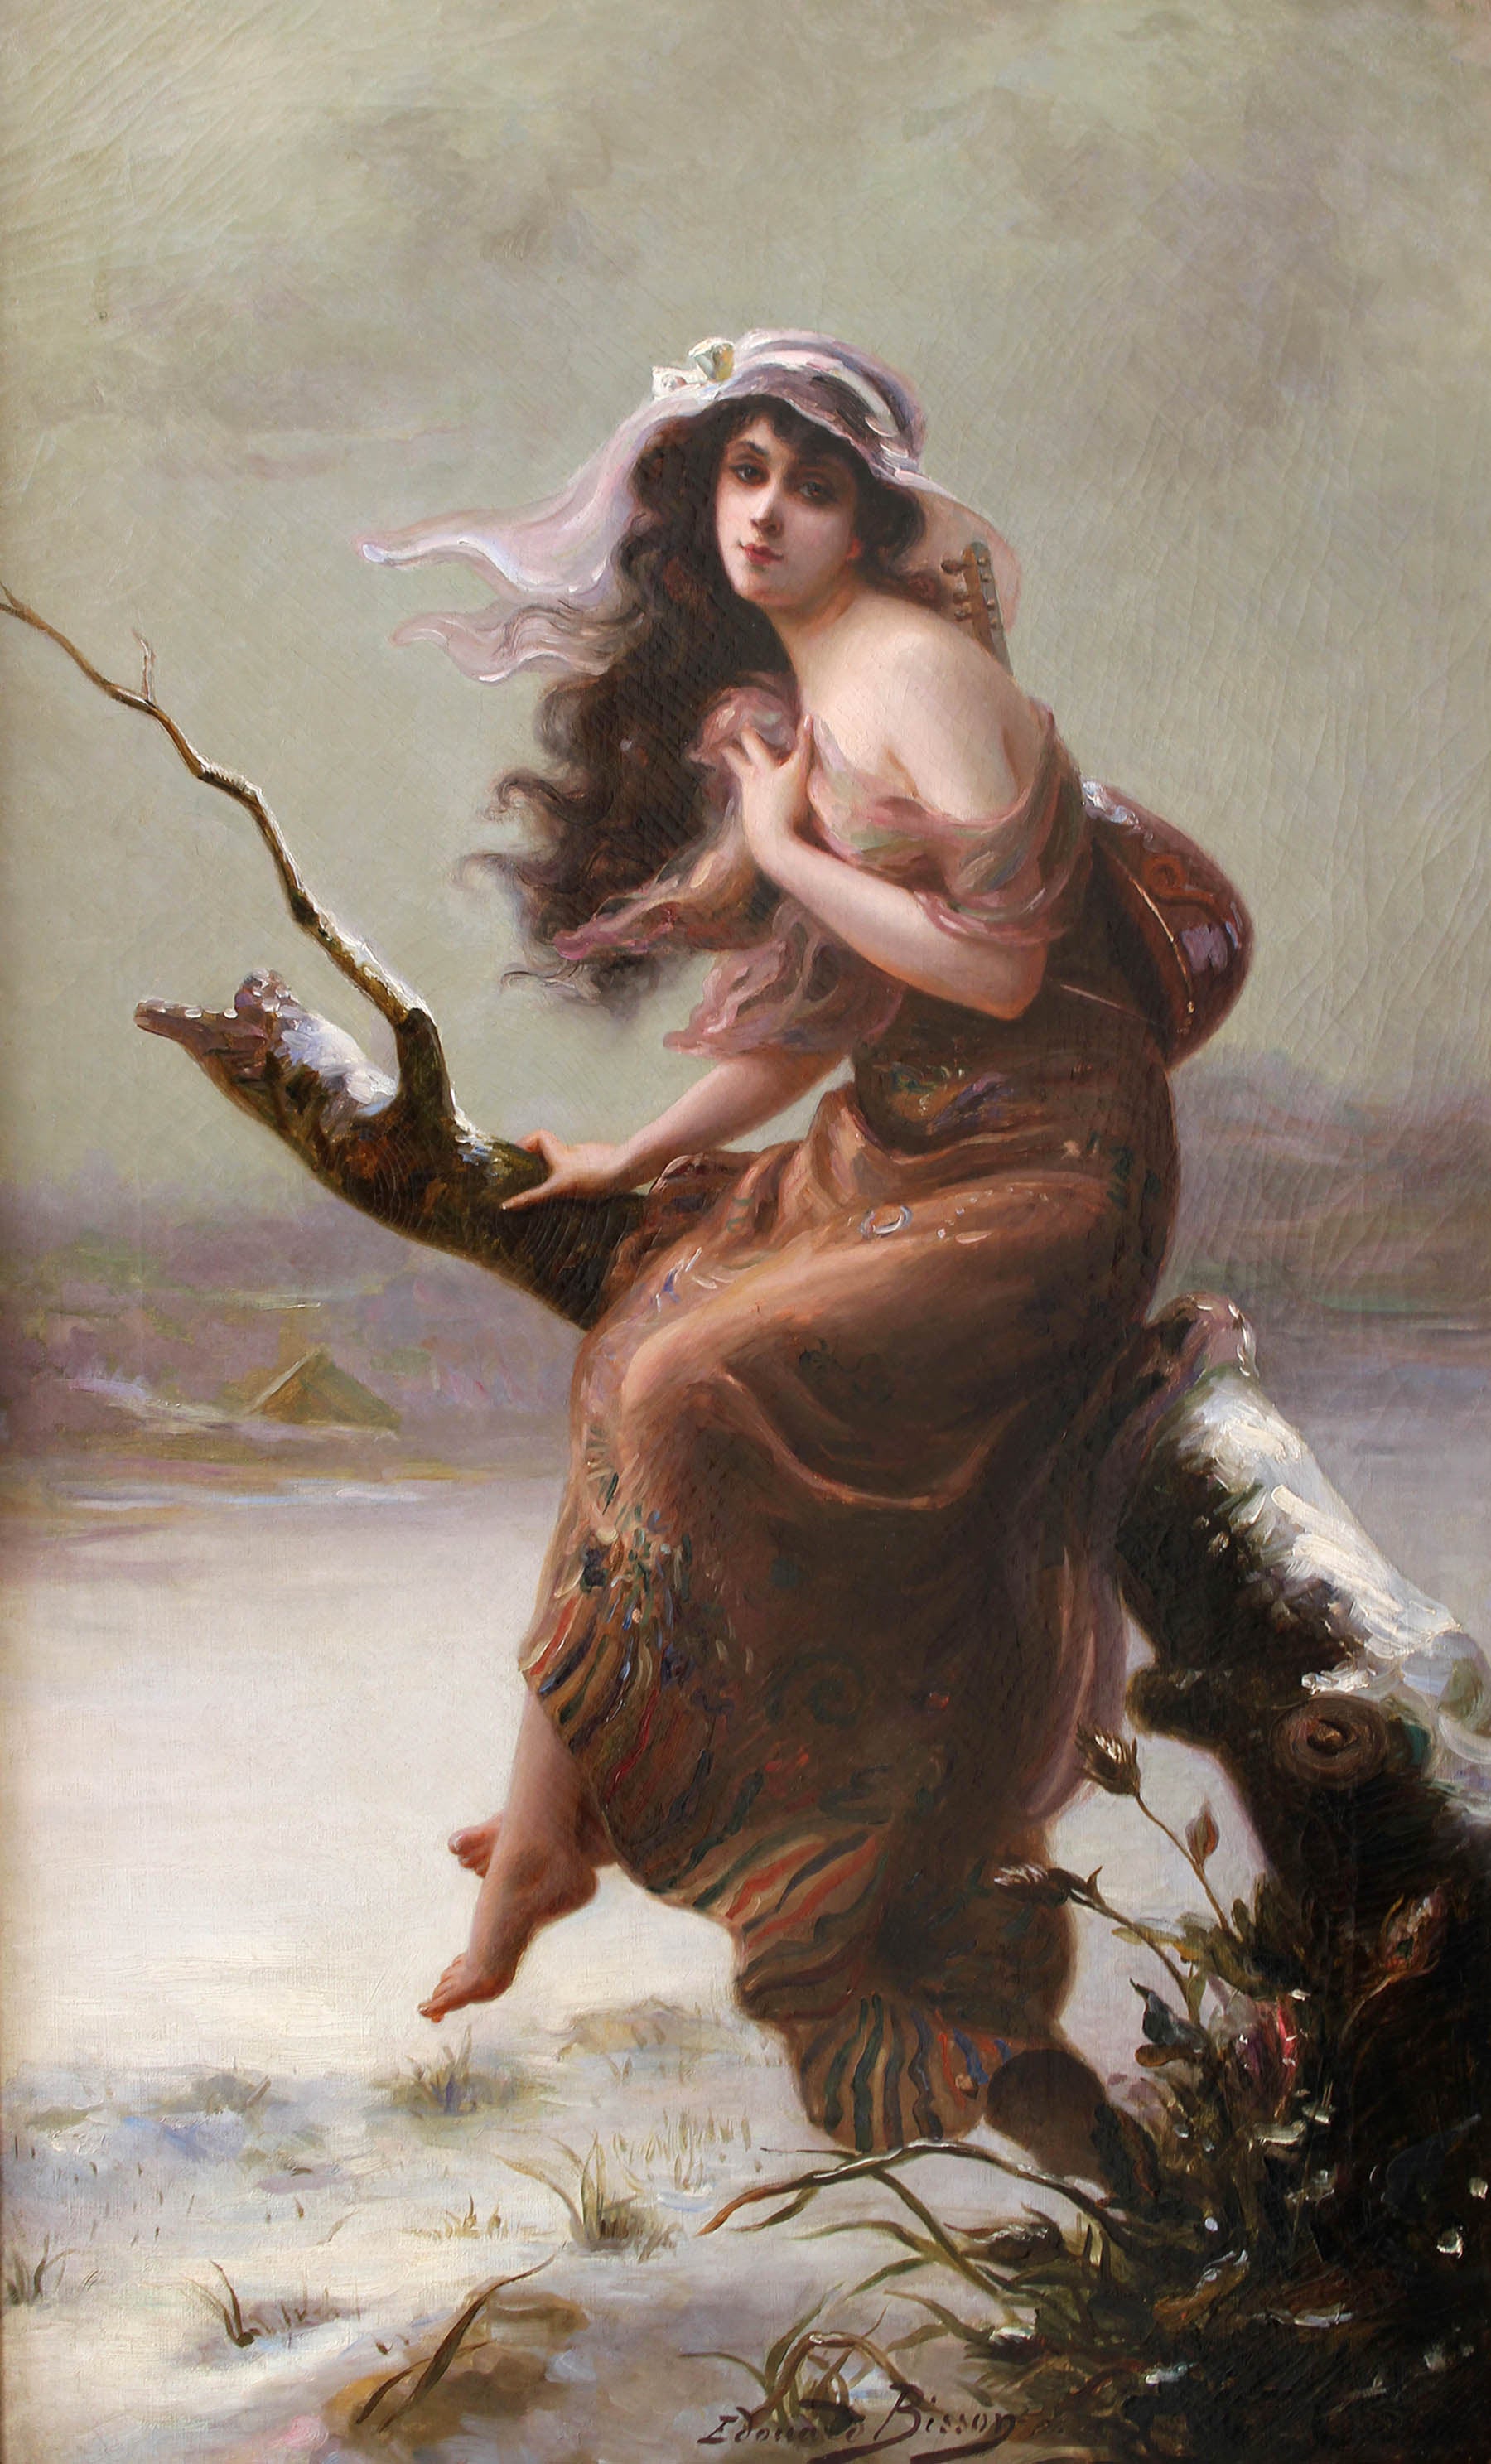 Dramatic Painting by Edouard BIsson (1856-1939)